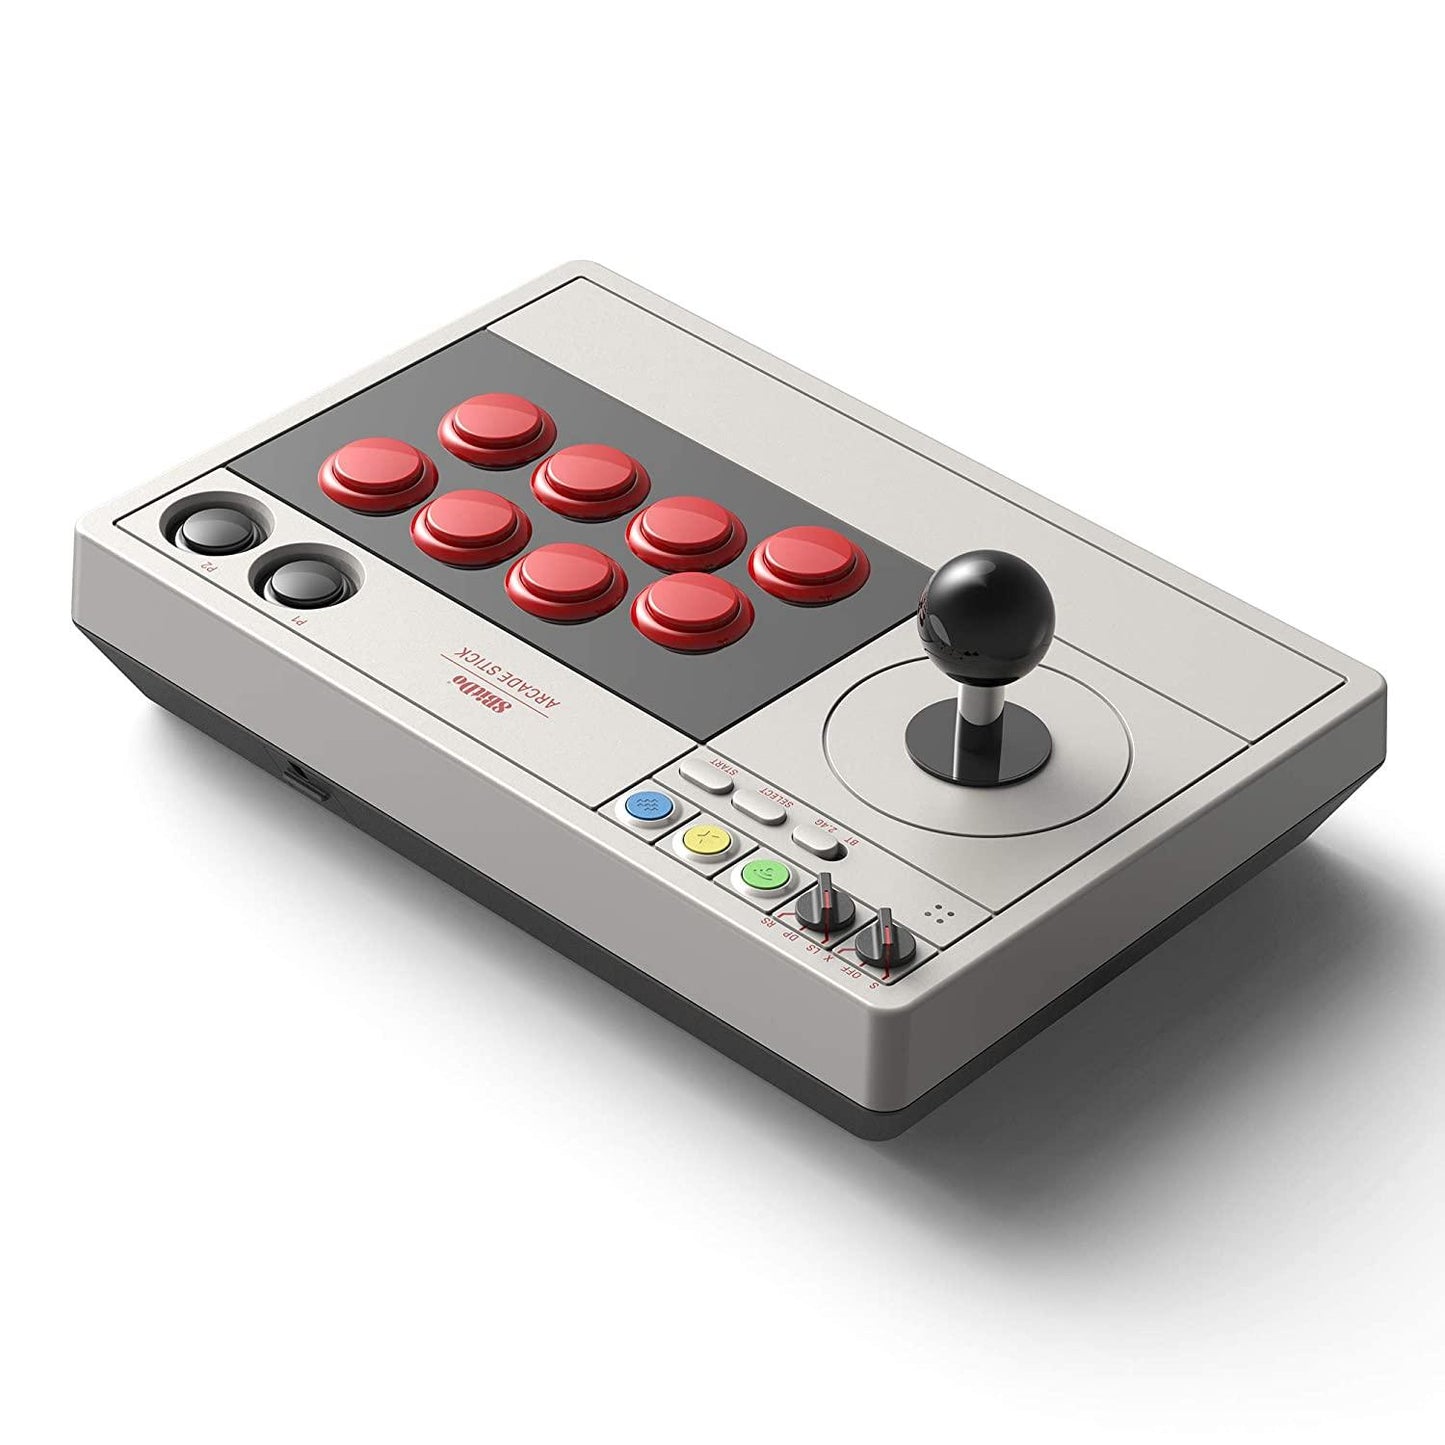 8BitDo Arcade Stick for Switch and Windows, Wireless Bluetooth and Wired Connection Supported - 8bitdo